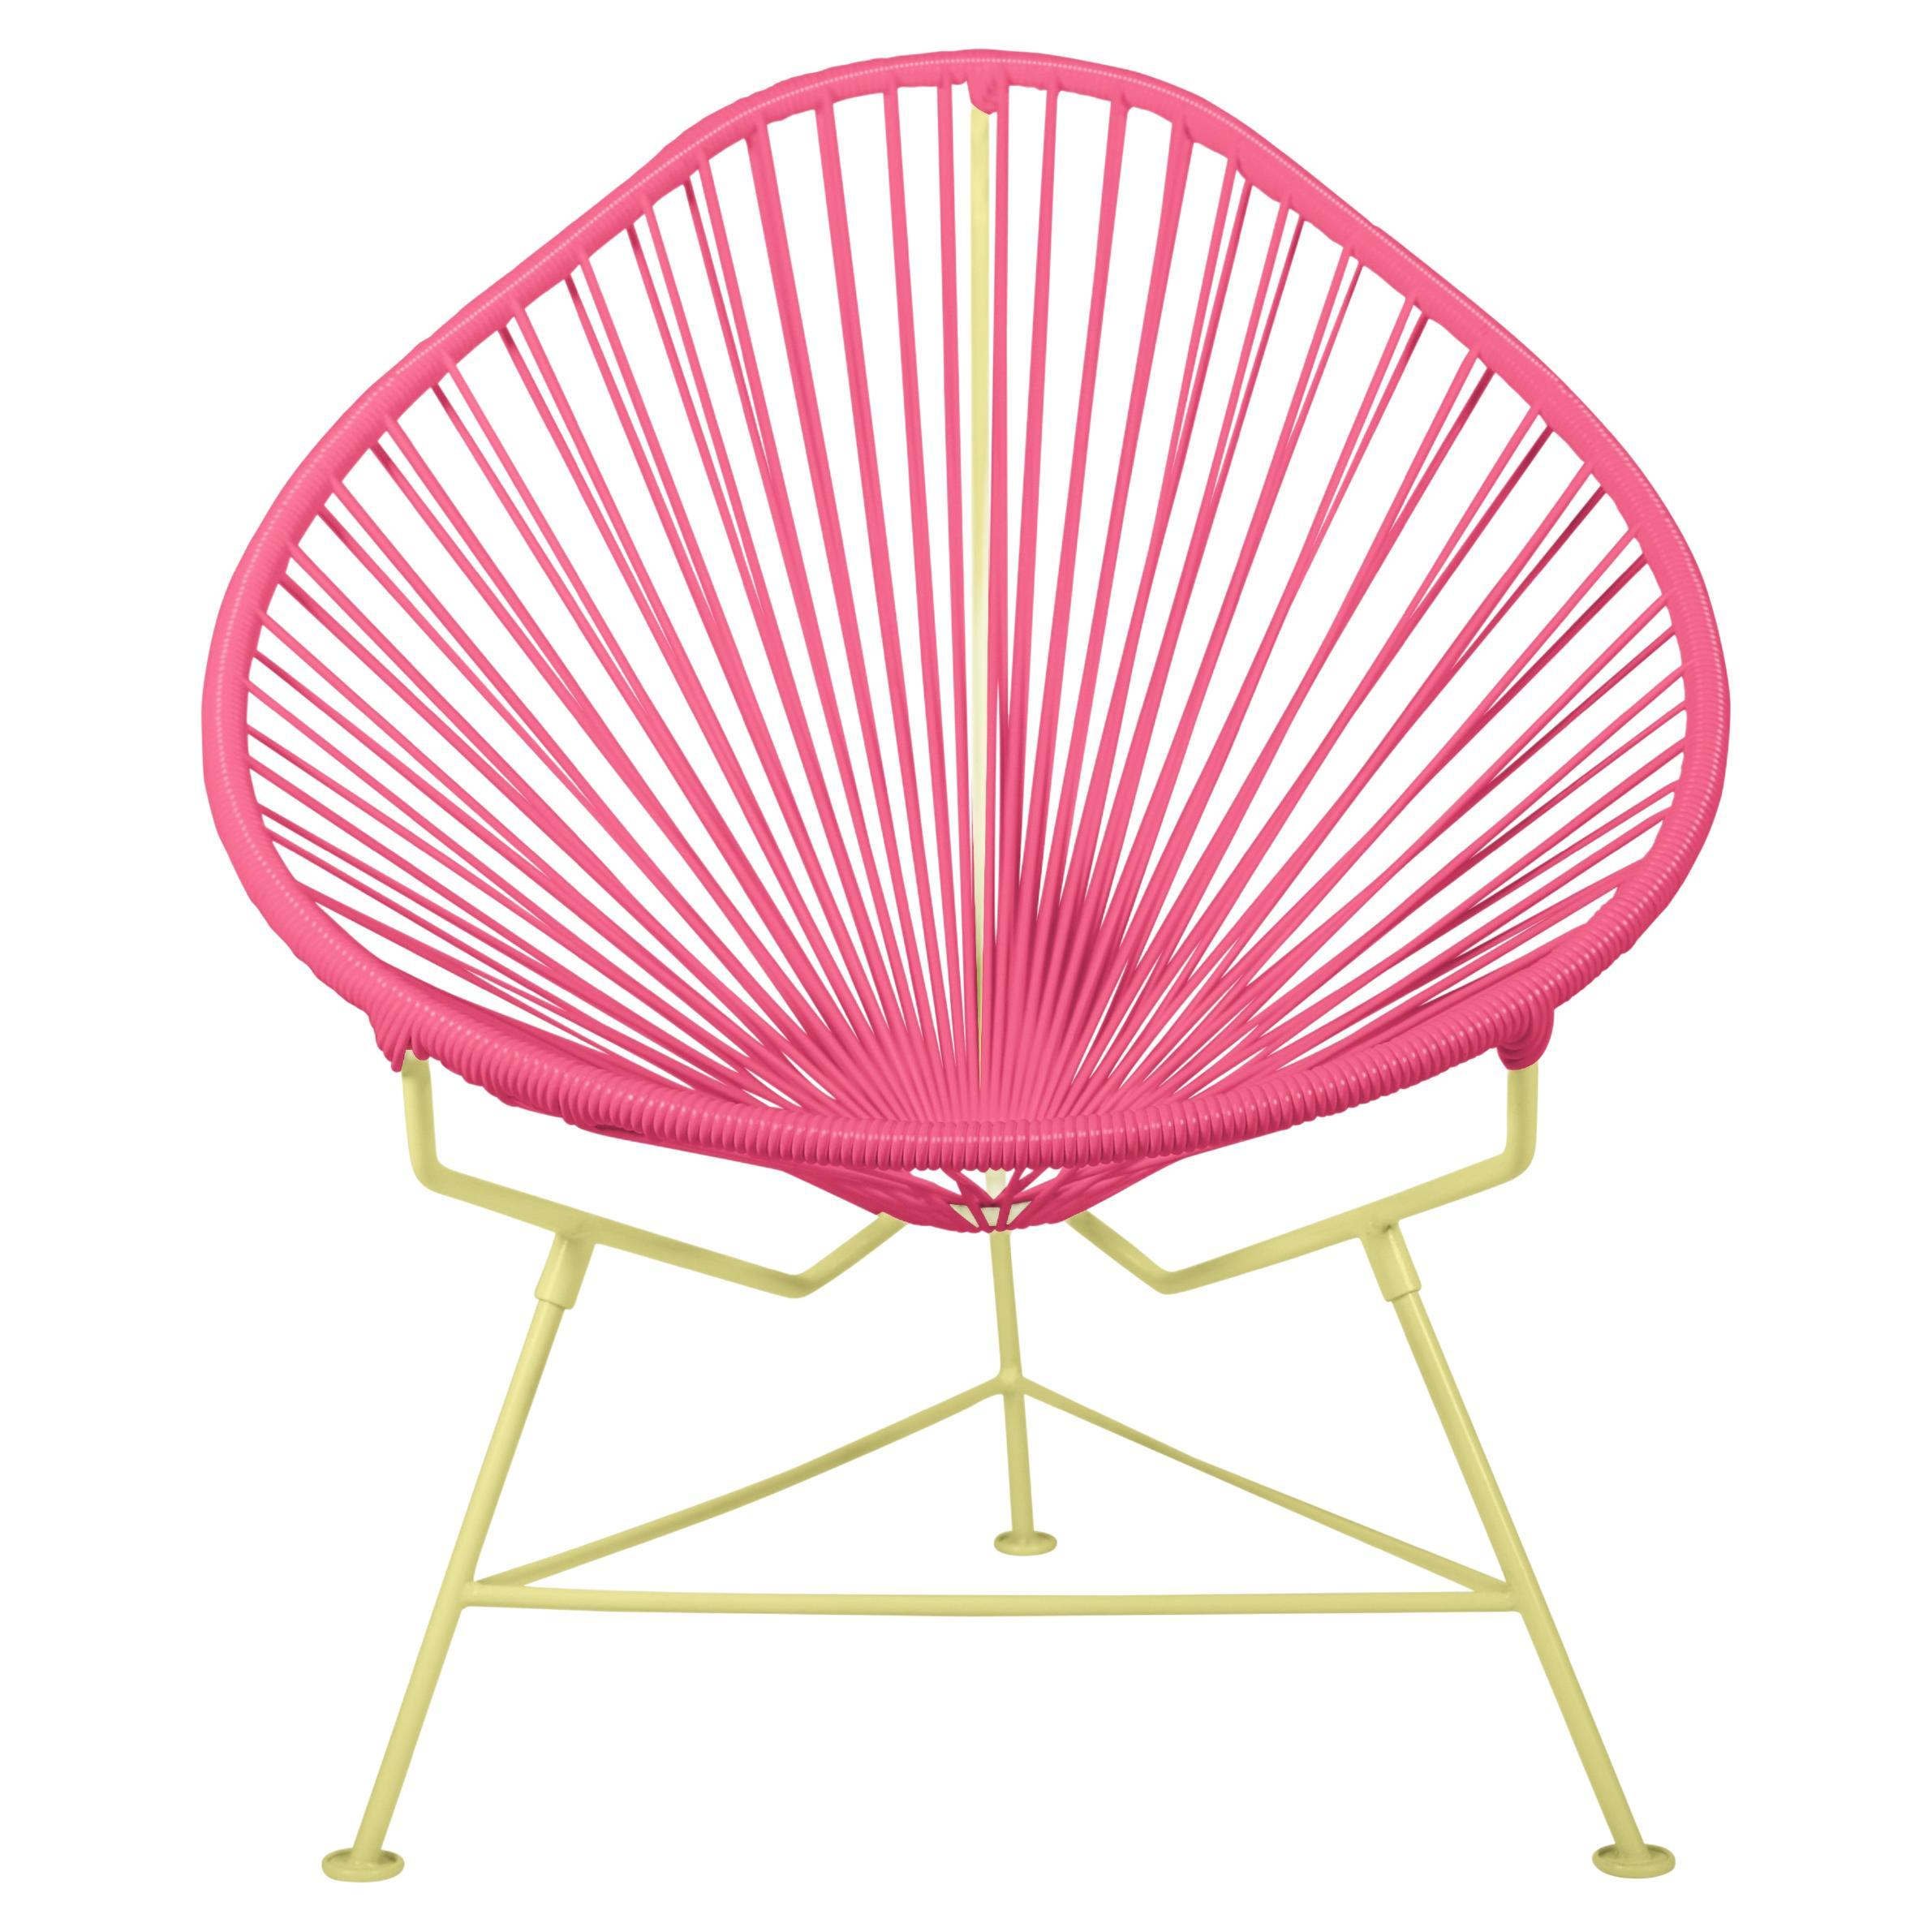 Innit Designs Acapulco Chair Pink Weave on Yellow Frame For Sale